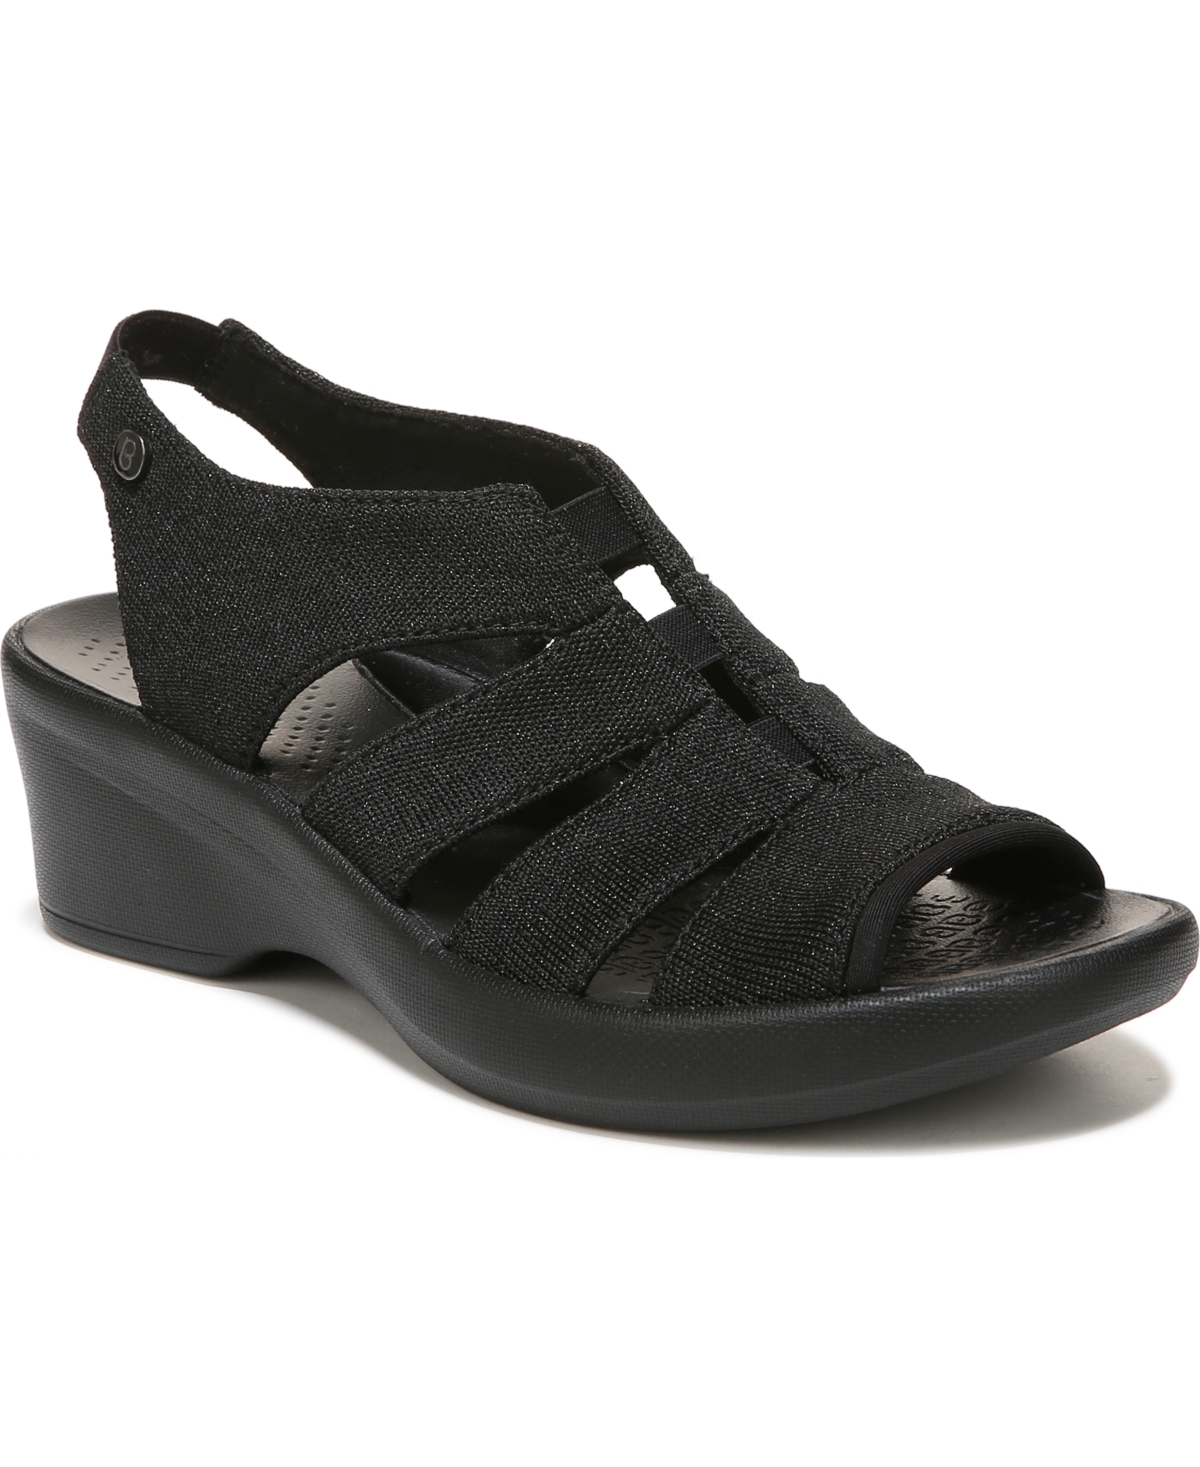 Bzees Premium Finale Washable Wedge Slingbacks In Black Shimmer Fabric